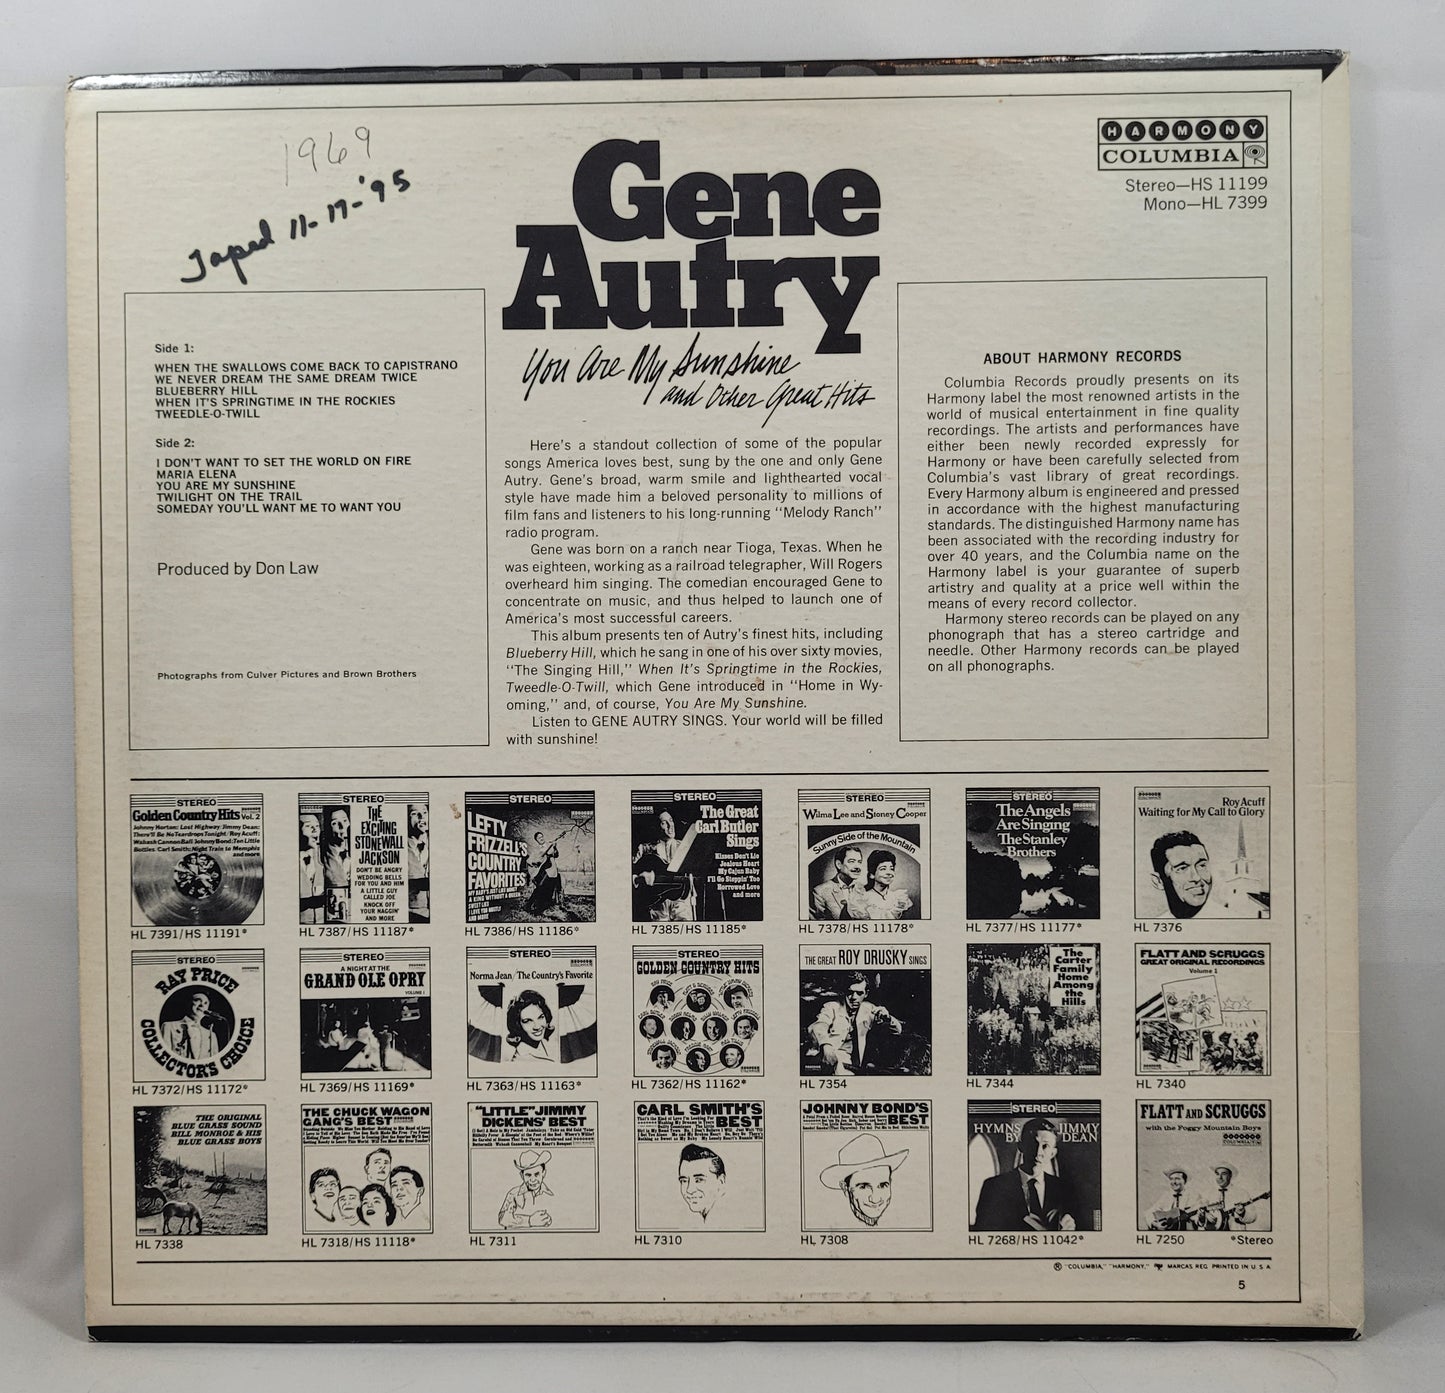 Gene Autry - You Are My Sunshine and Other Great Hits [Vinyl Record LP]